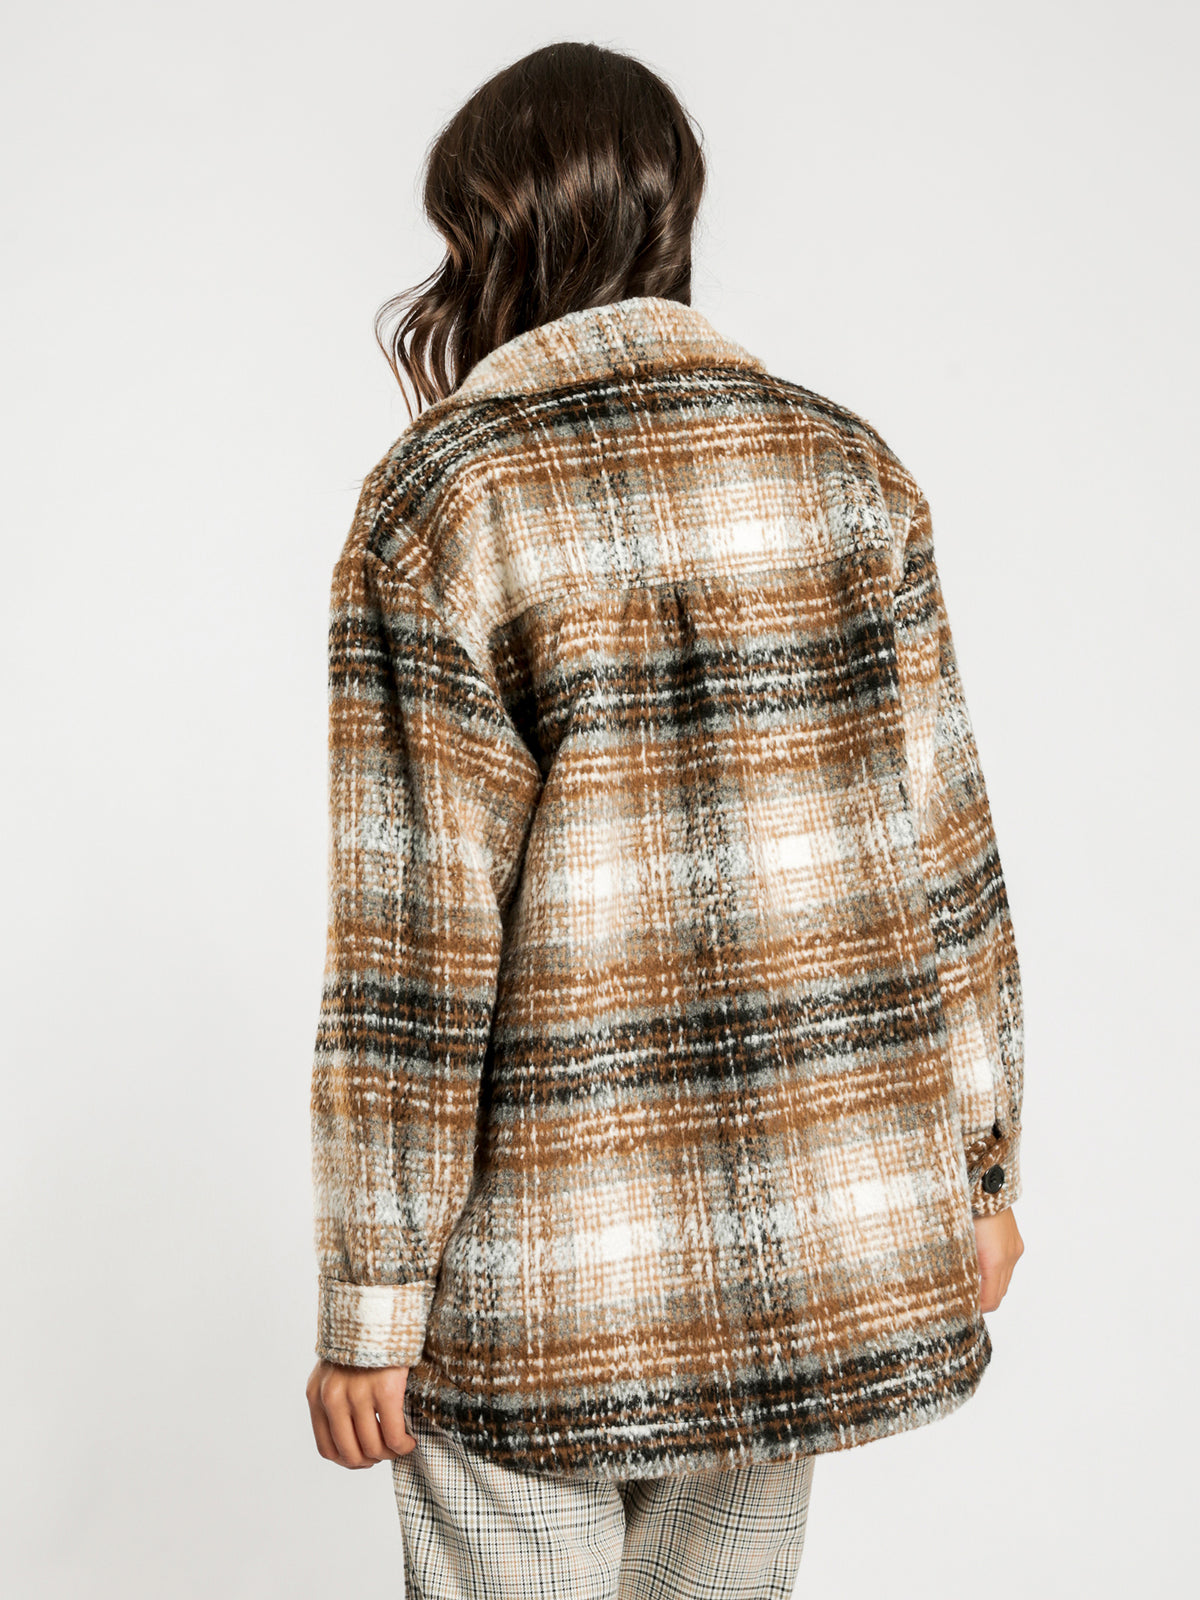 Check Worker Jacket in Brown Check